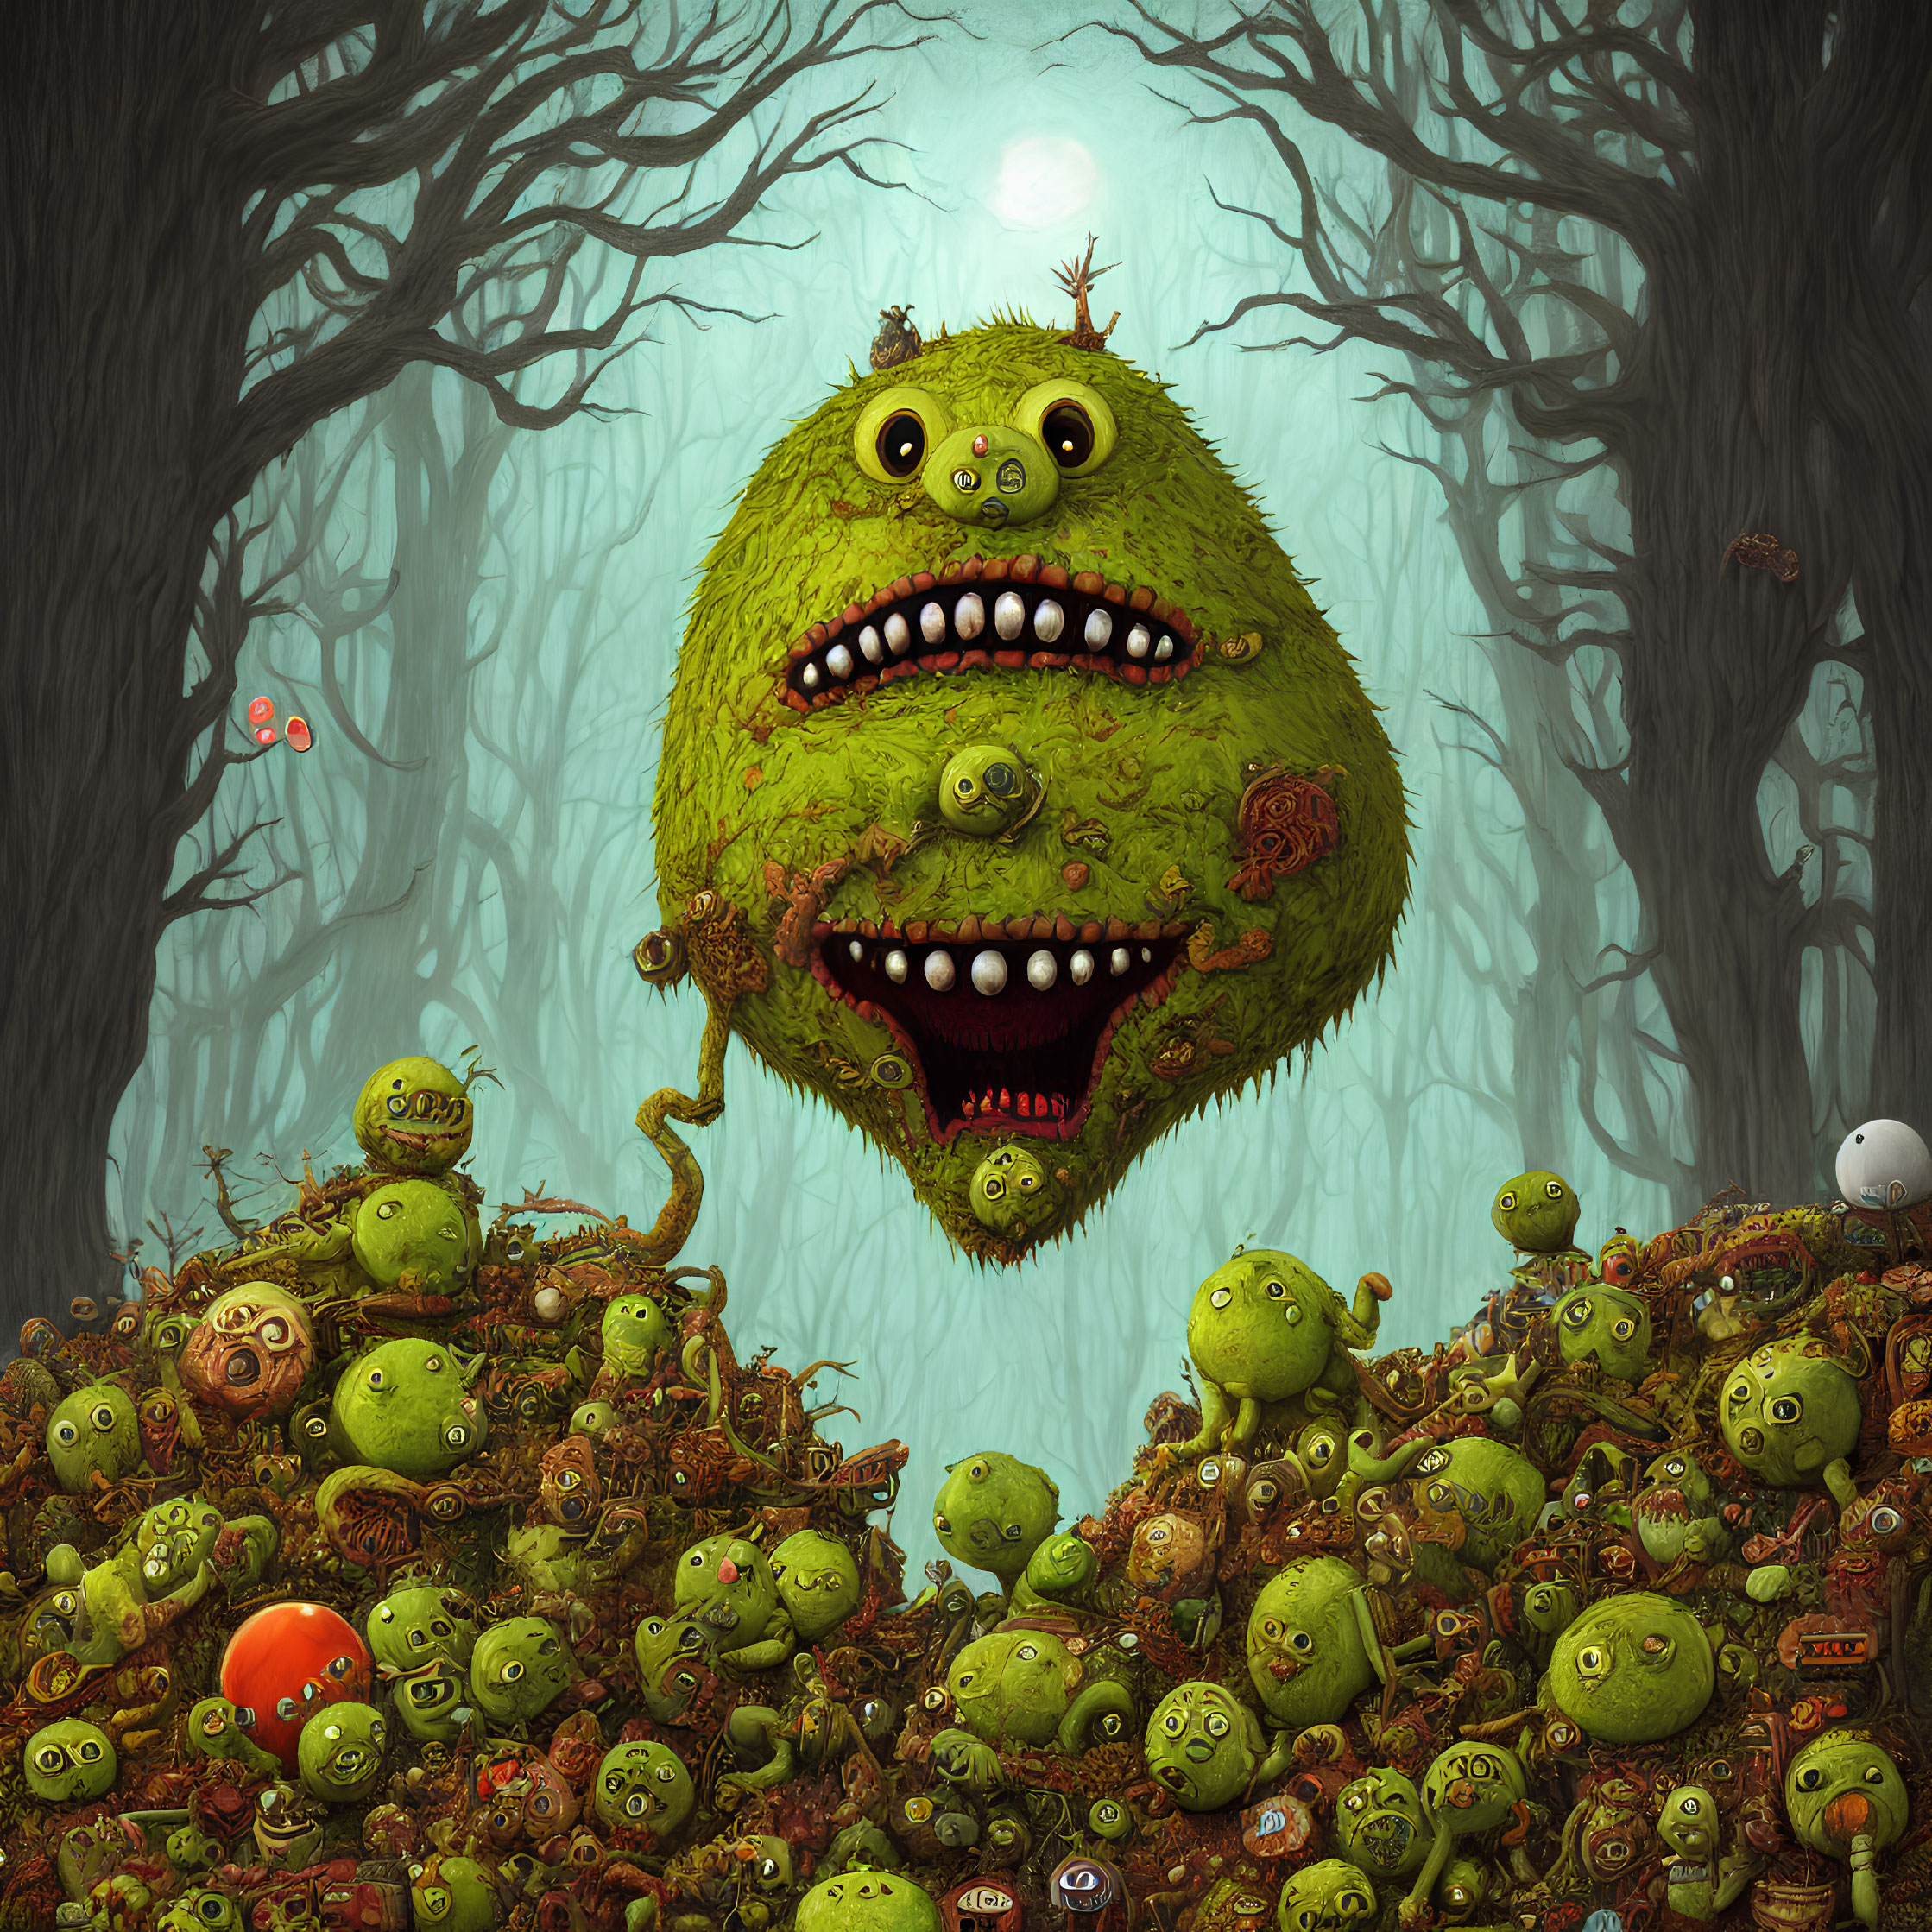 Colorful Forest Scene with Green Round Monster and Smaller Creatures